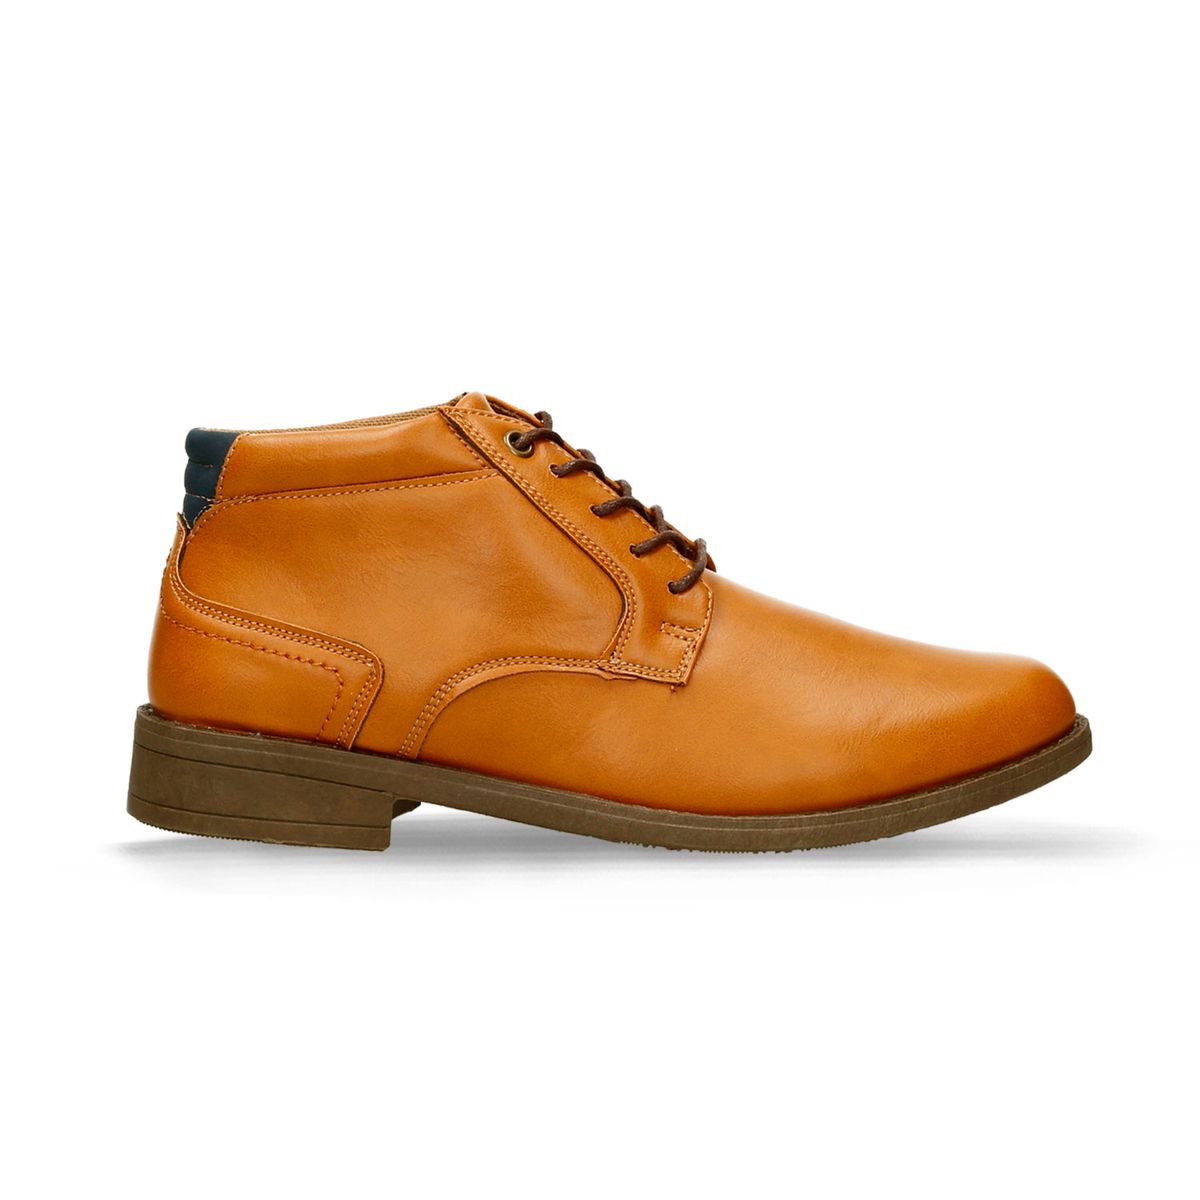 Zapatos Formales Camel Bata Red Label Fausto Hombre